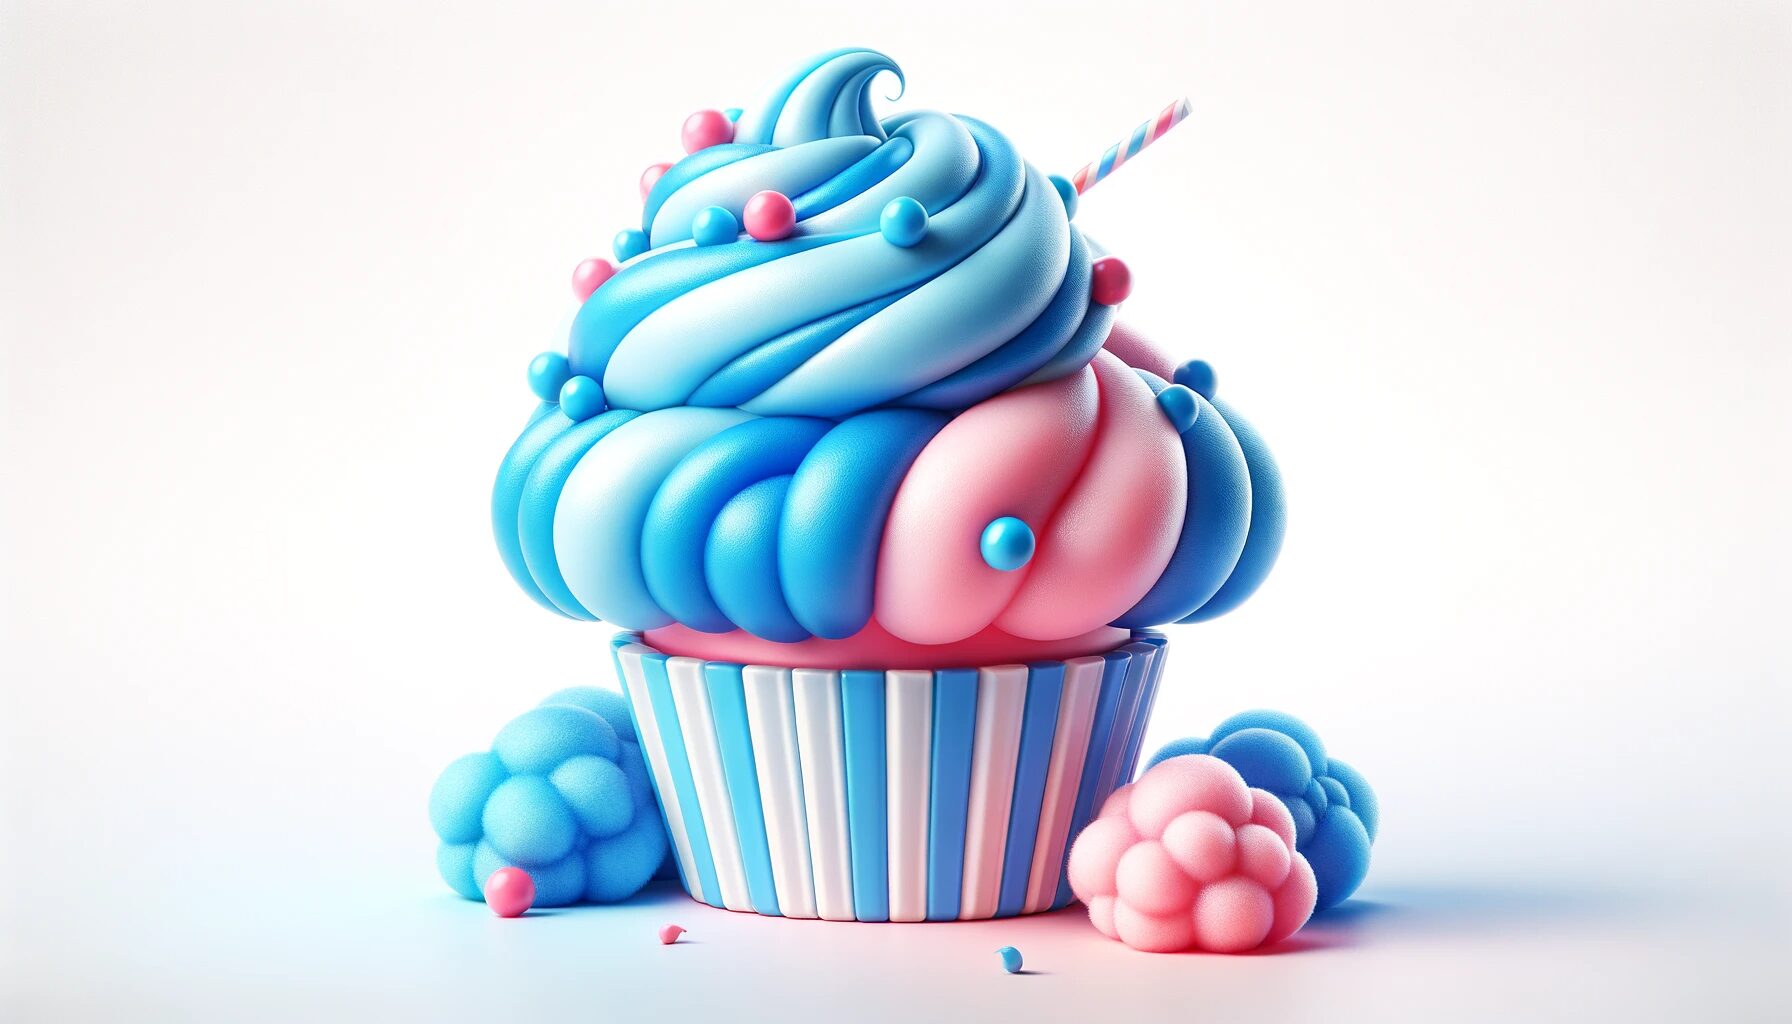 Cotton Candy Cupcake with Vibrant Frosting